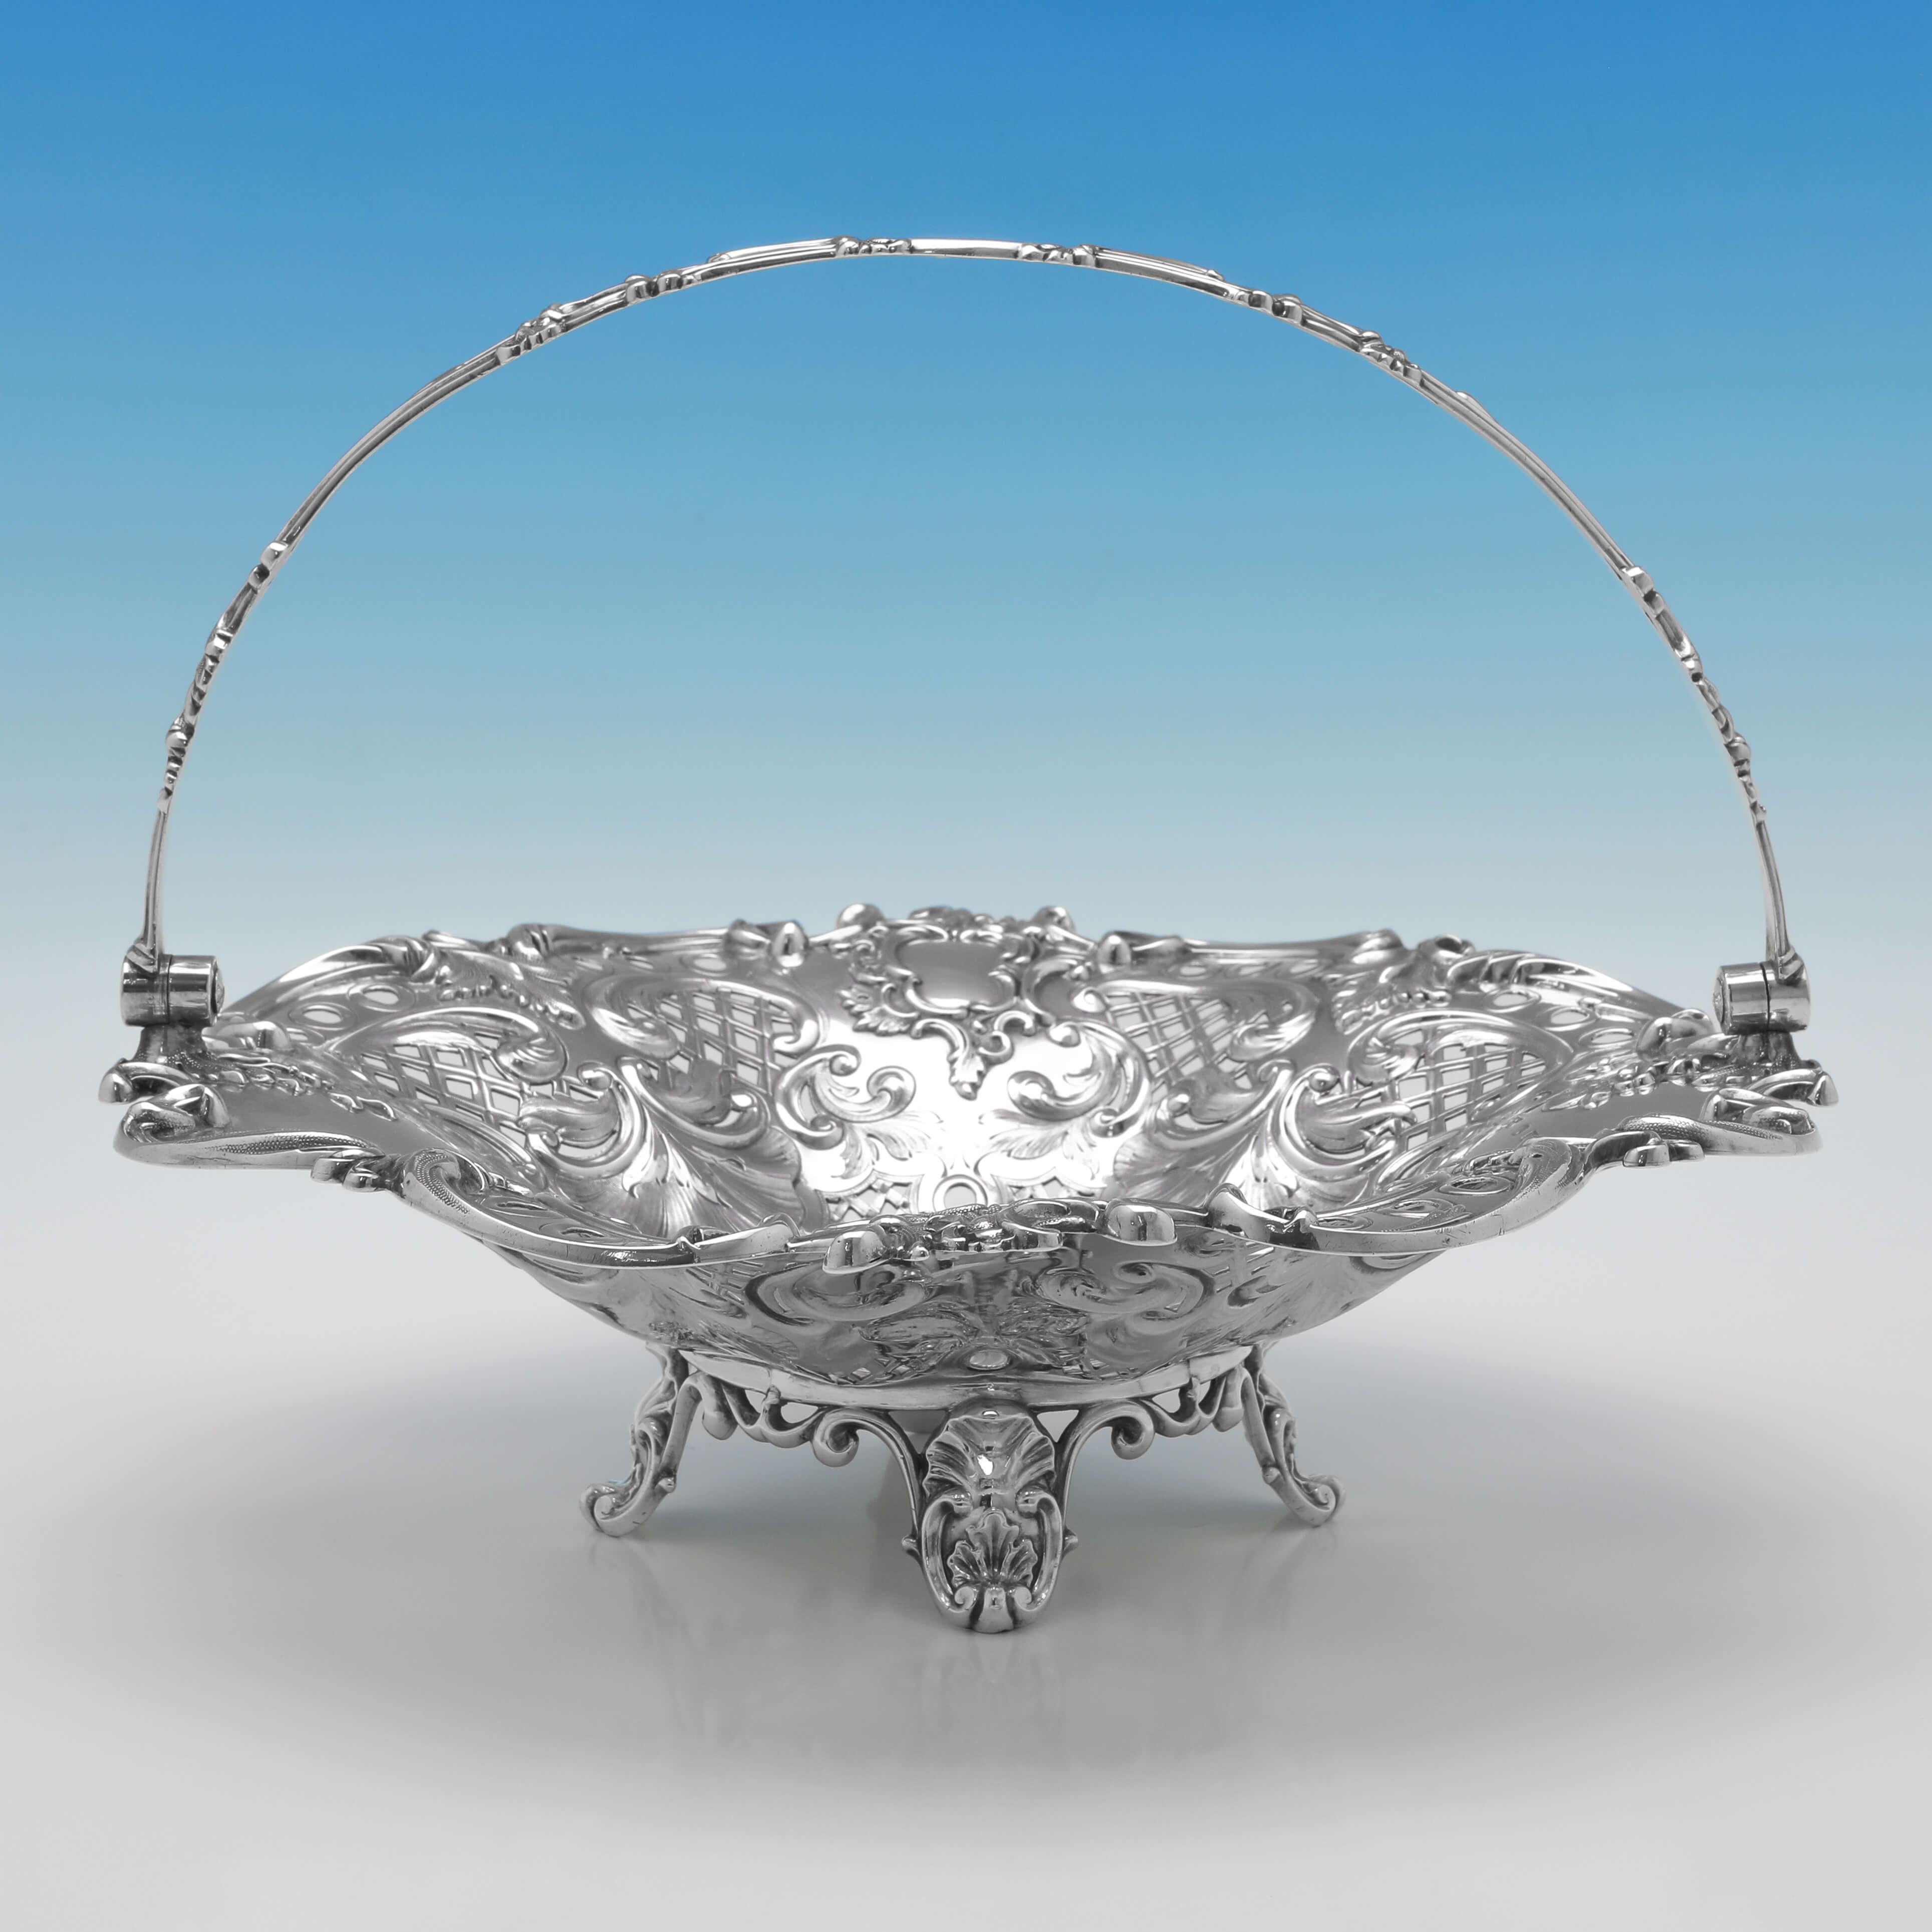 Hallmarked in Sheffield in 1845 by Hawksworth Eyres & Co., this attractive, Antique Sterling Silver Basket, is ornate in design, standing on cast shell feet, and featuring pierced and repoussé decoration to the body. The basket measures 8.75